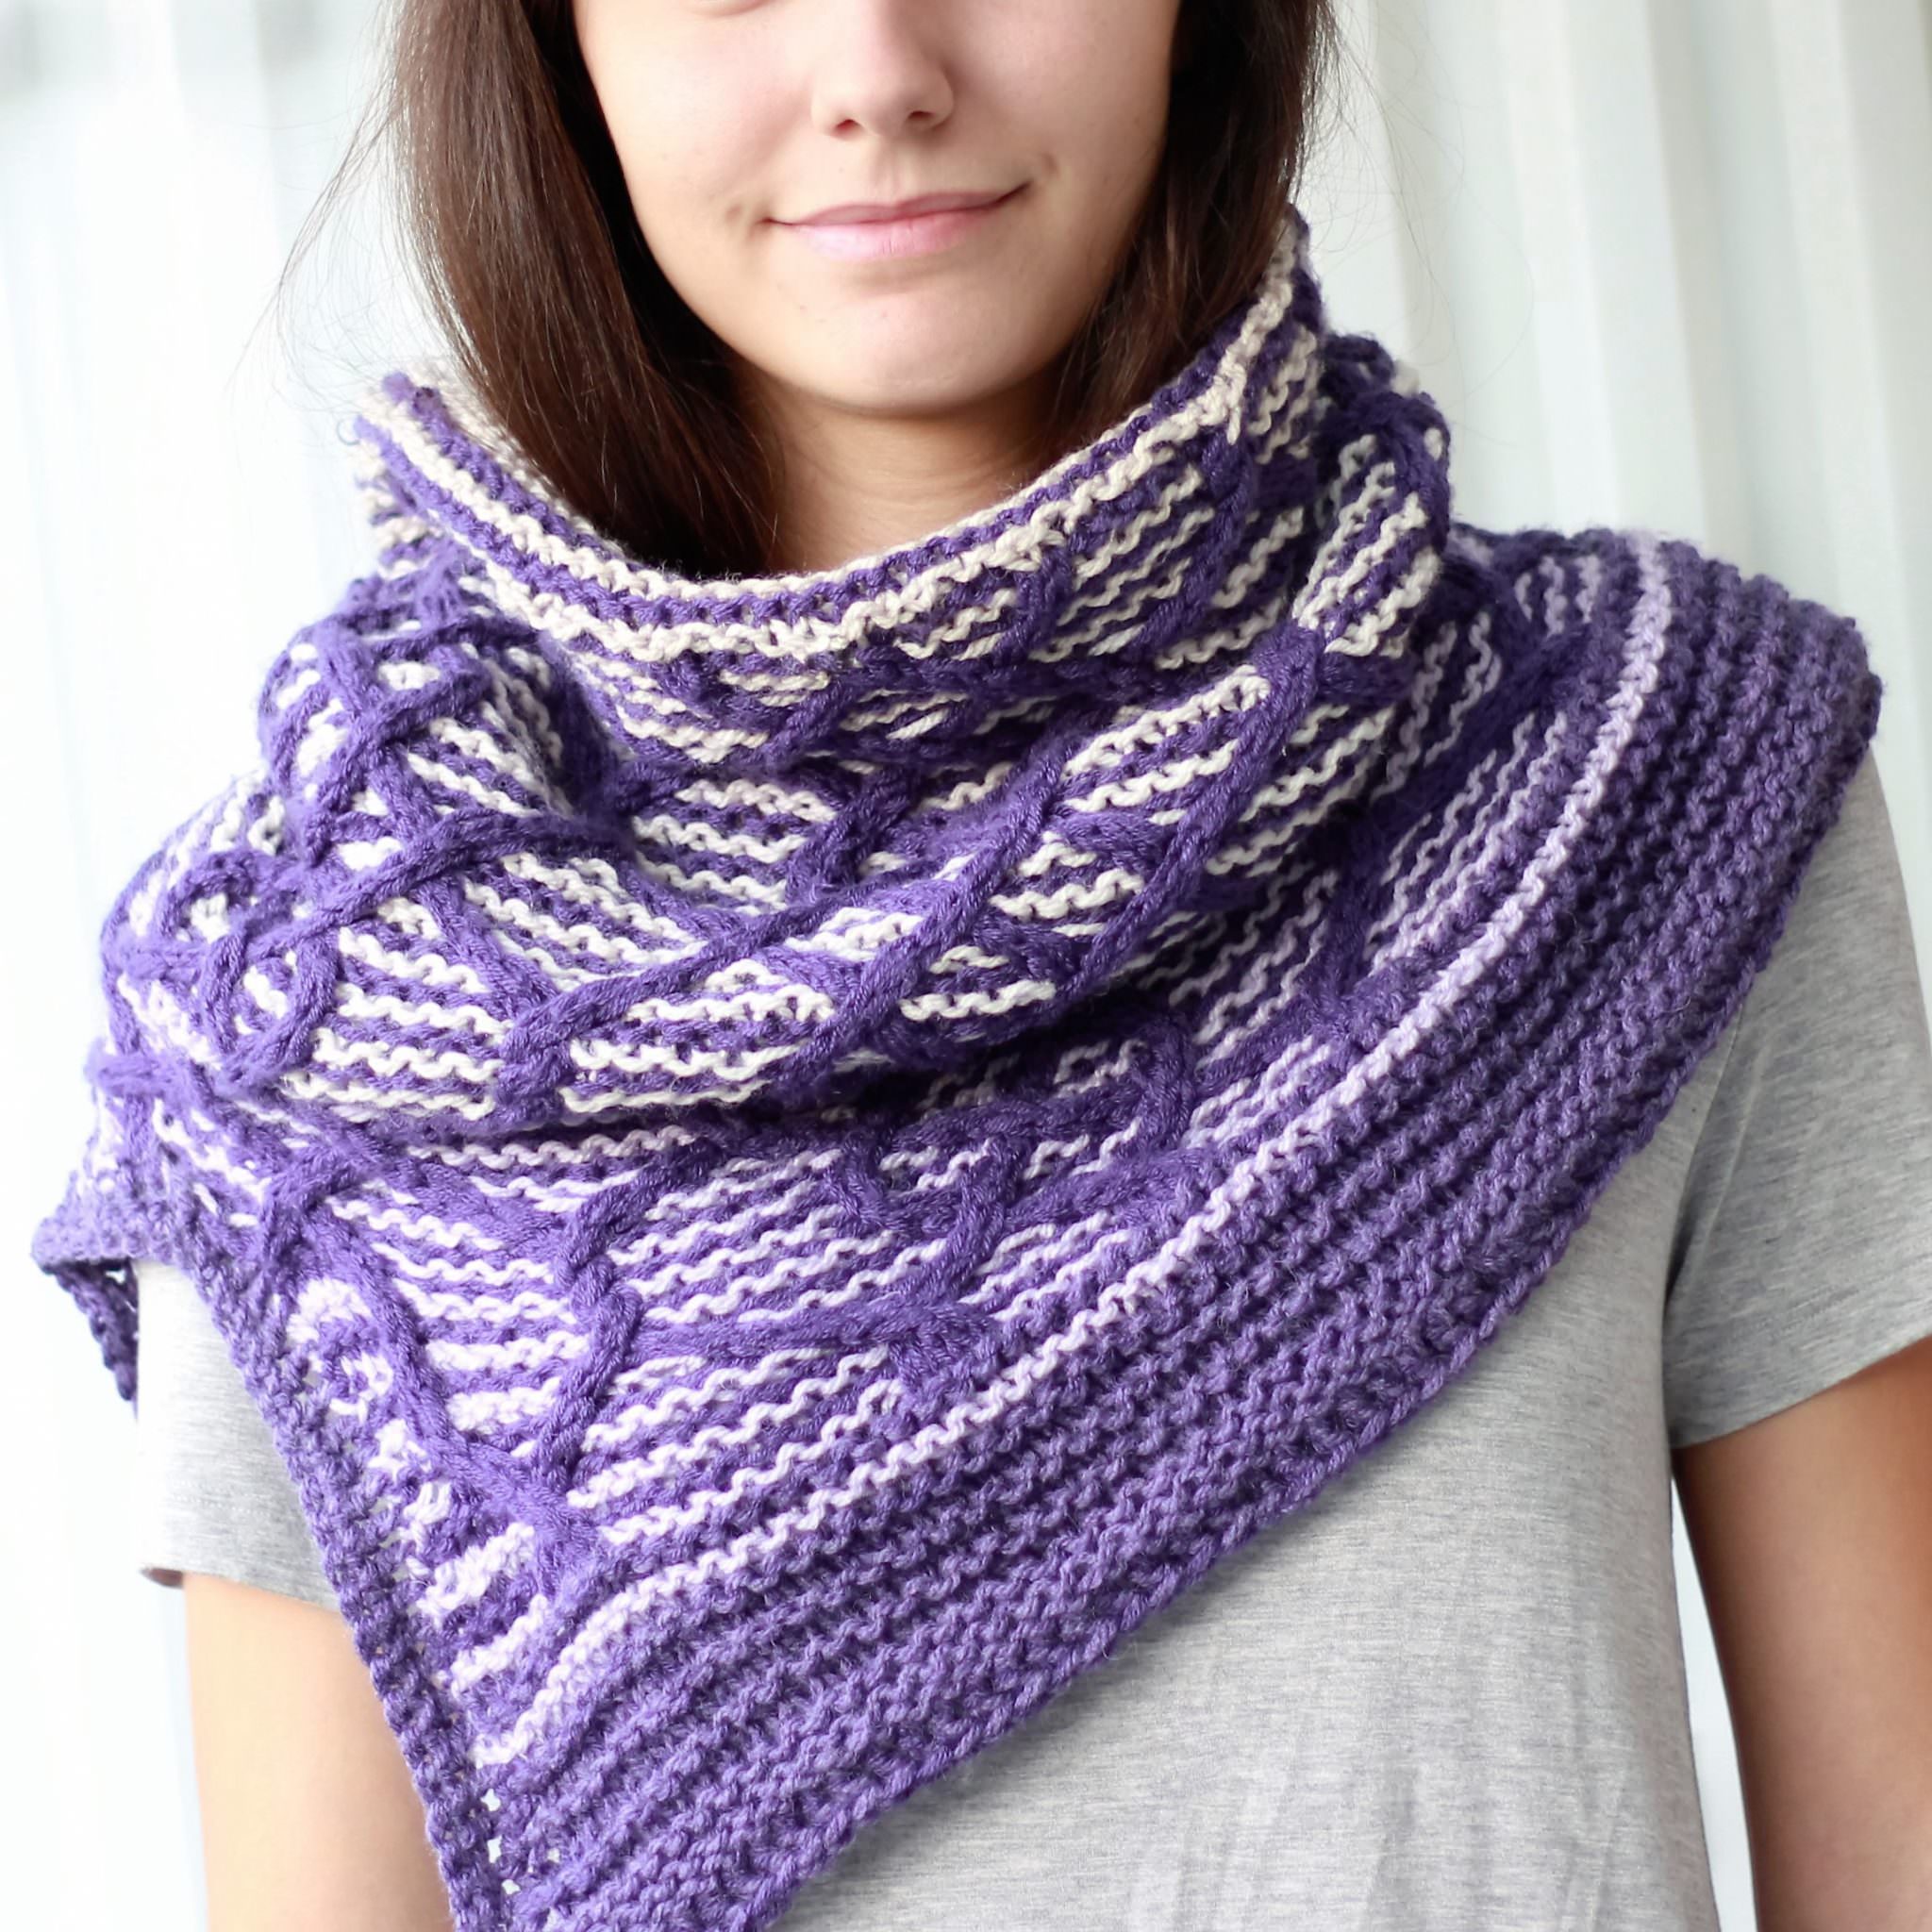 cadence / HOODED COWL - KNITTING PATTERN - The Easy Design